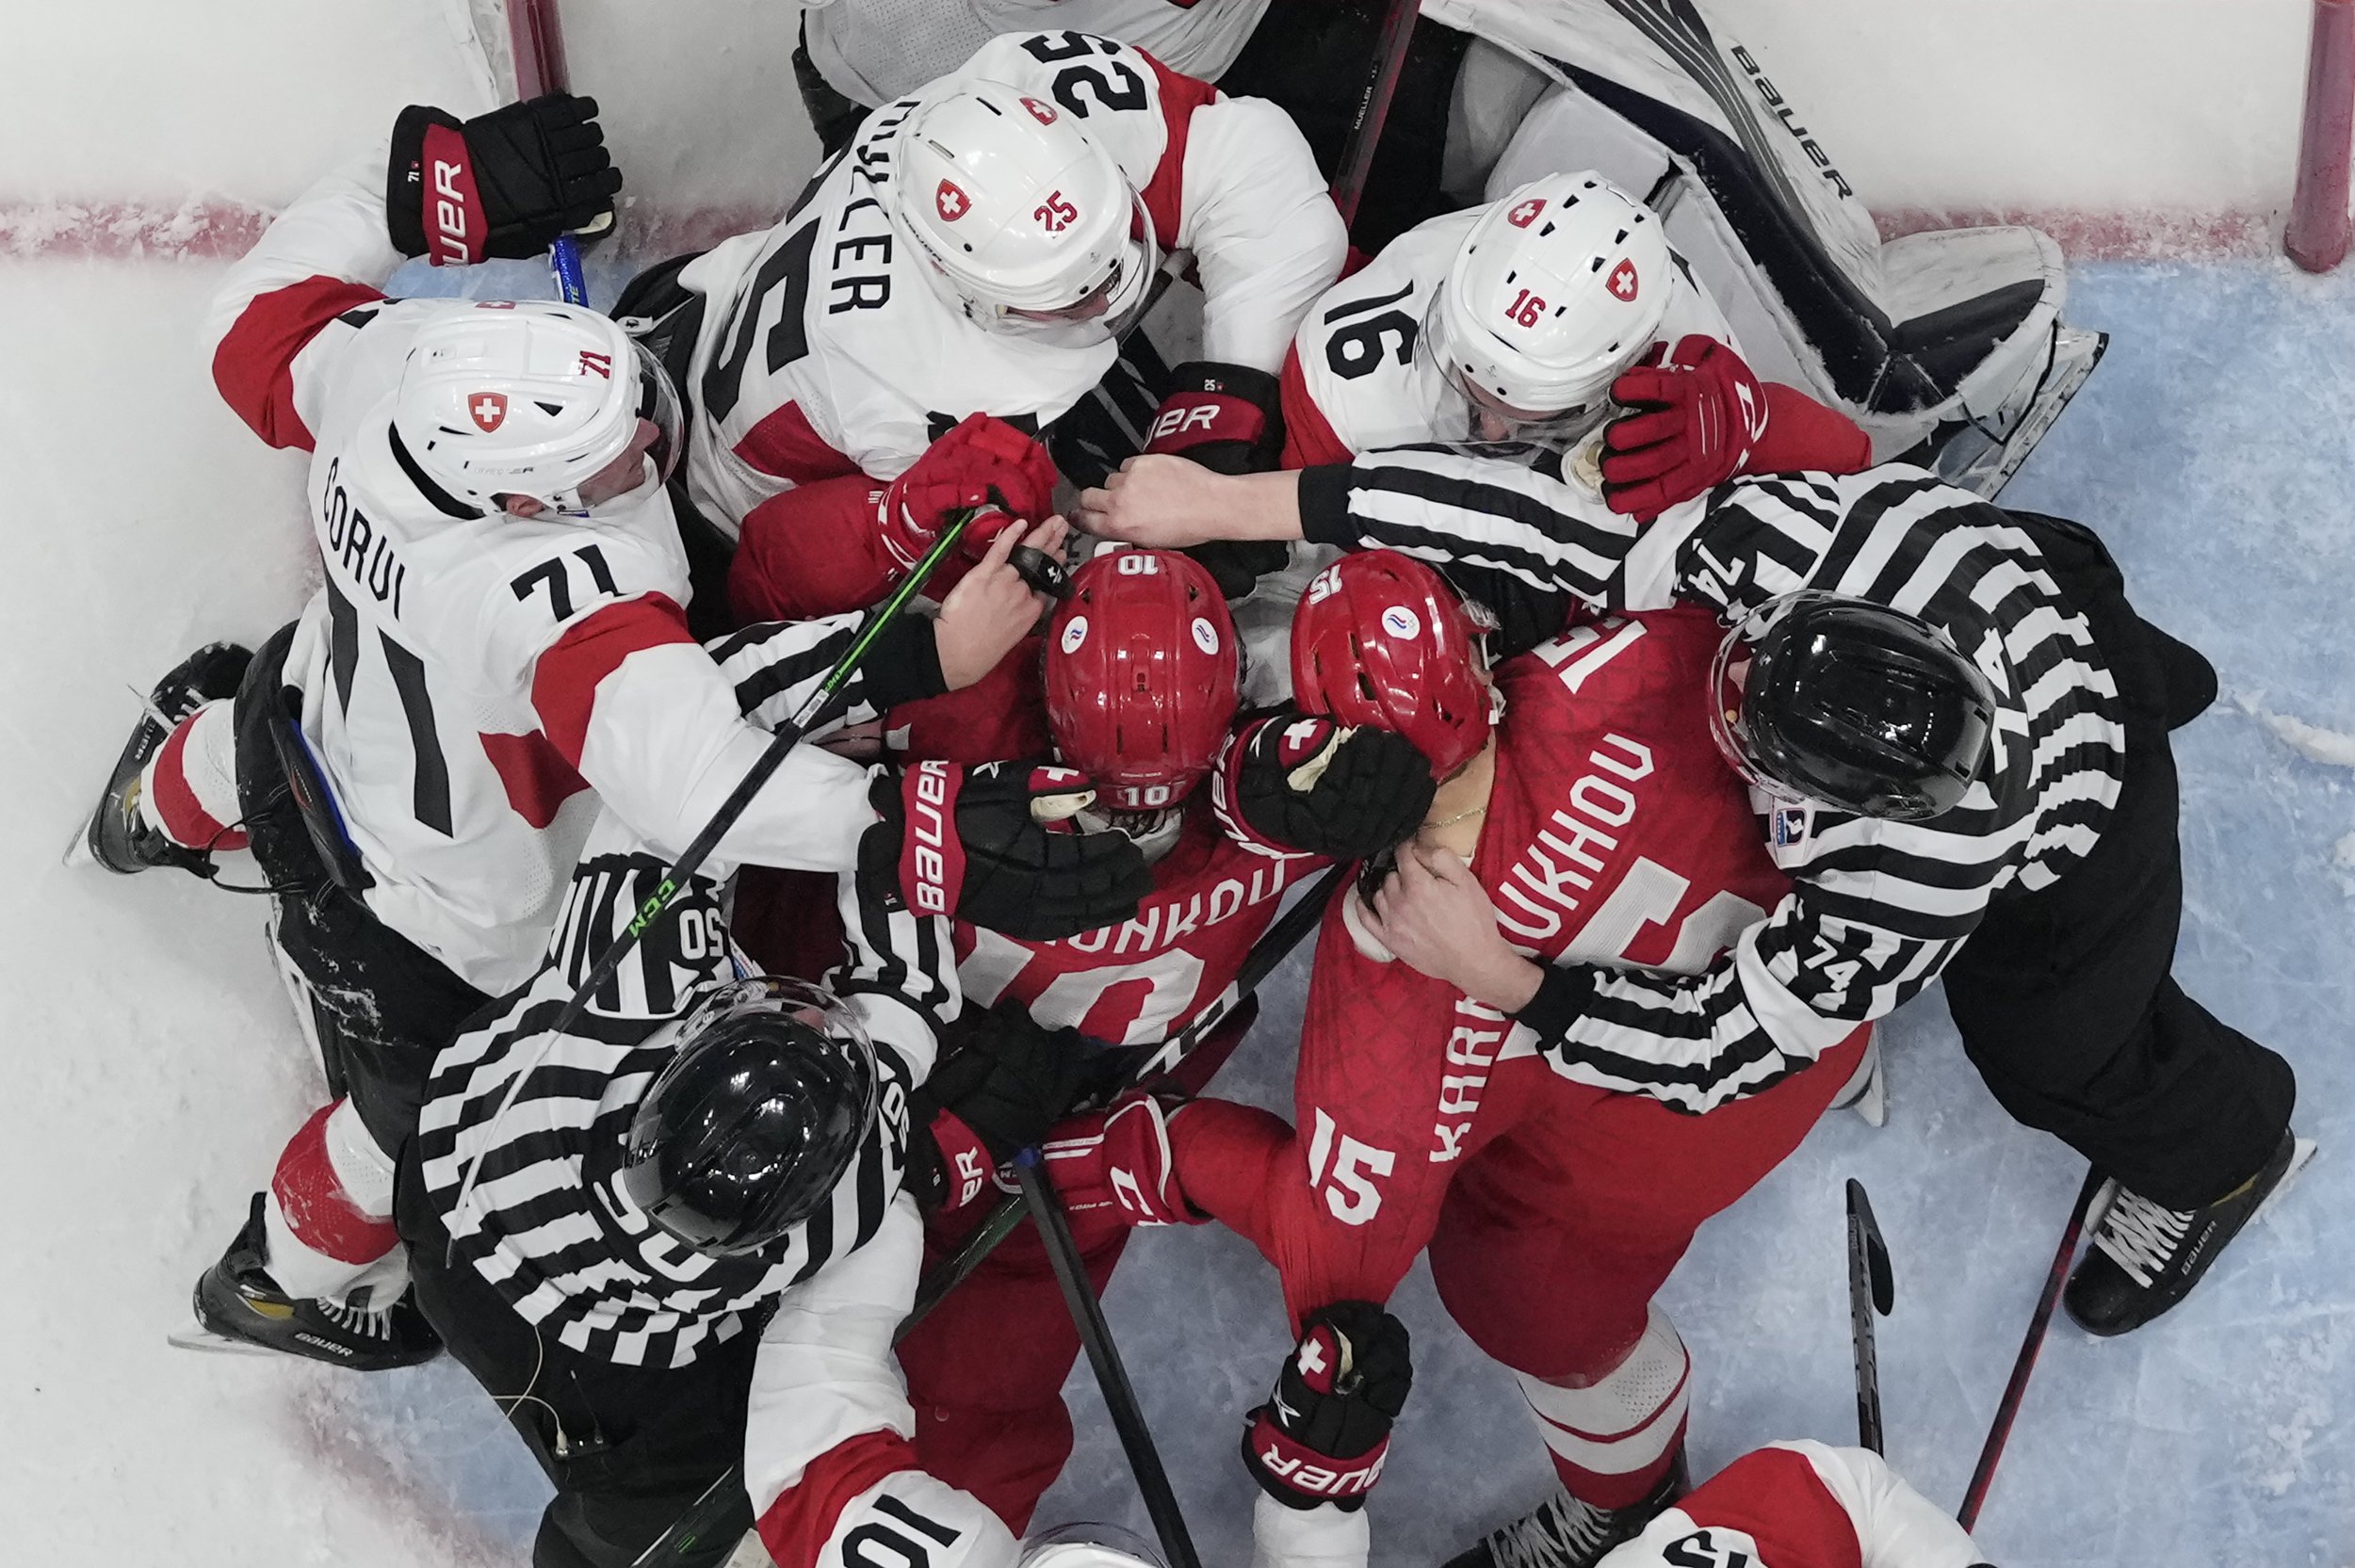  Russian Olympic Committee and Switzerland players fight as officials try to separate them during a preliminary round men's hockey game at the 2022 Winter Olympics, Wednesday, Feb. 9, 2022, in Beijing. (AP Photo/Matt Slocum) 